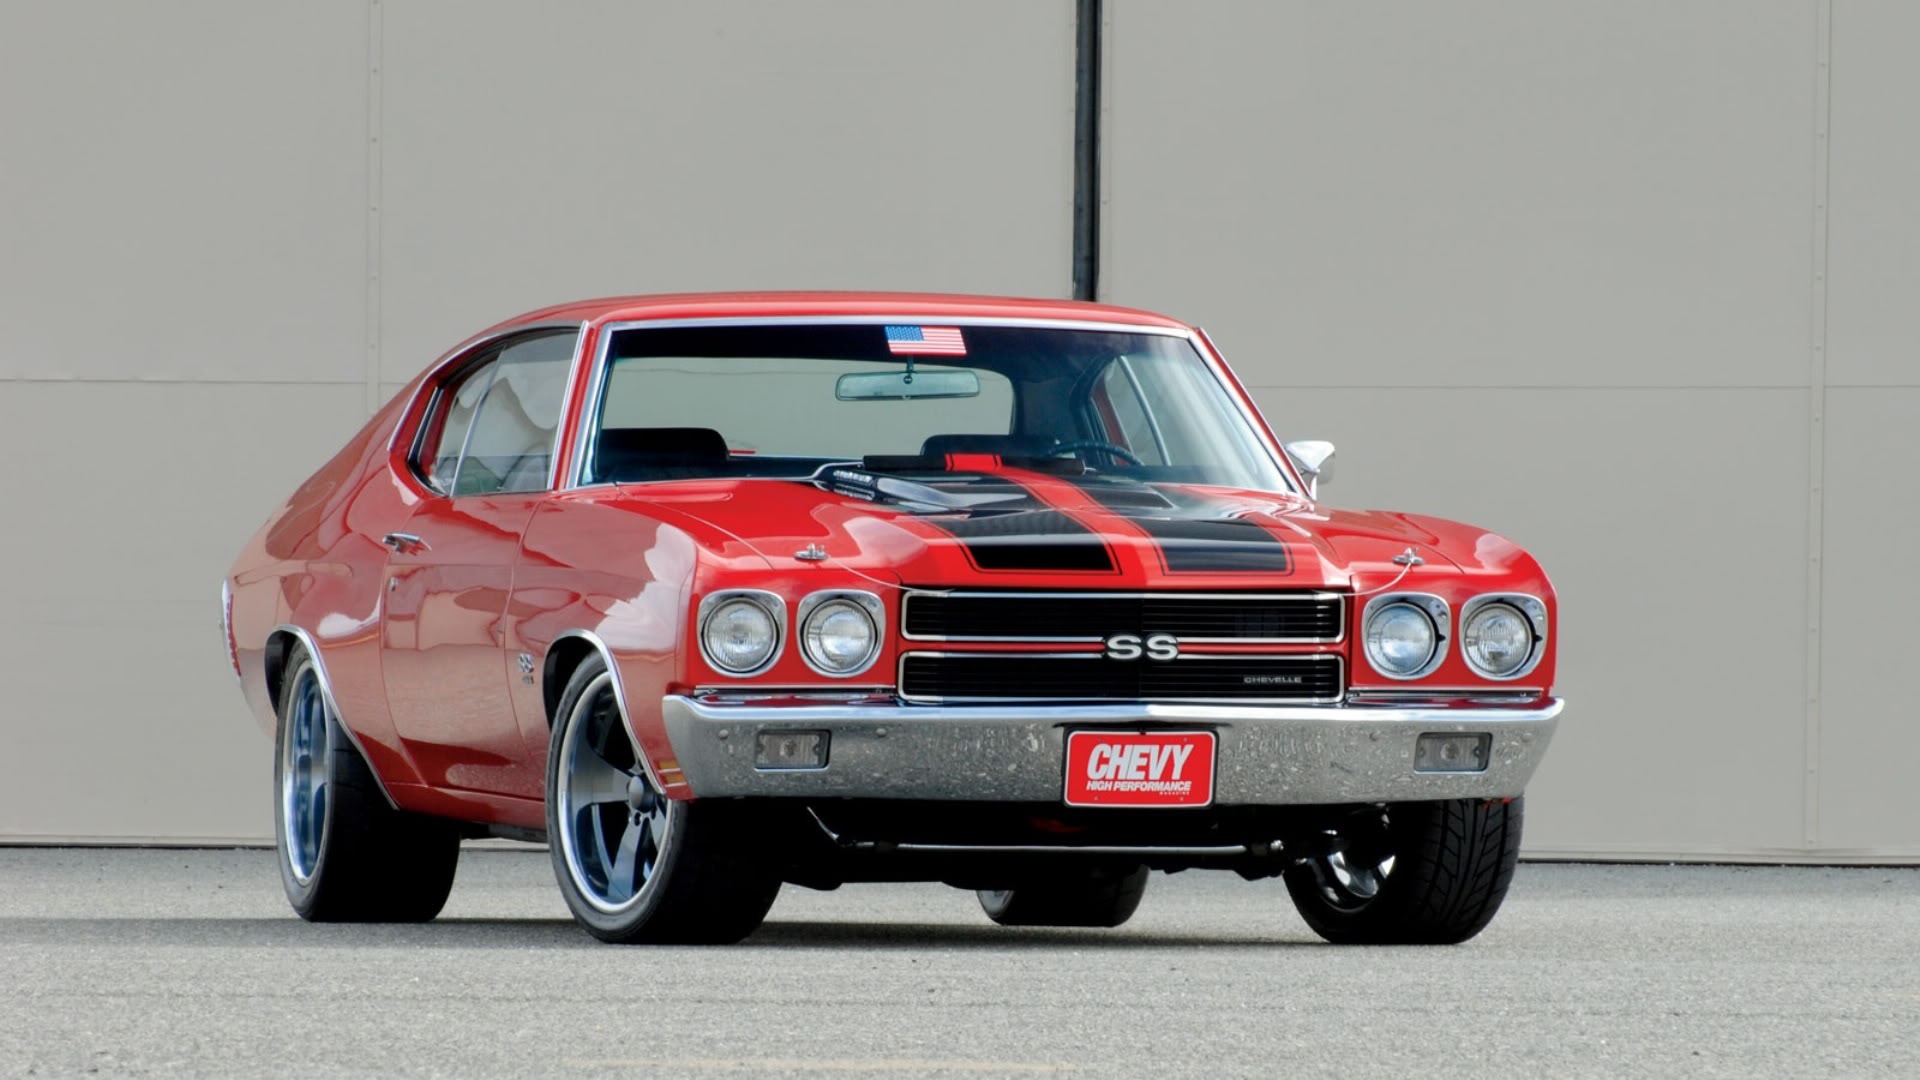 1970 Red Chevy Chevelle SS 454 wallpaper 1920x1080 37008